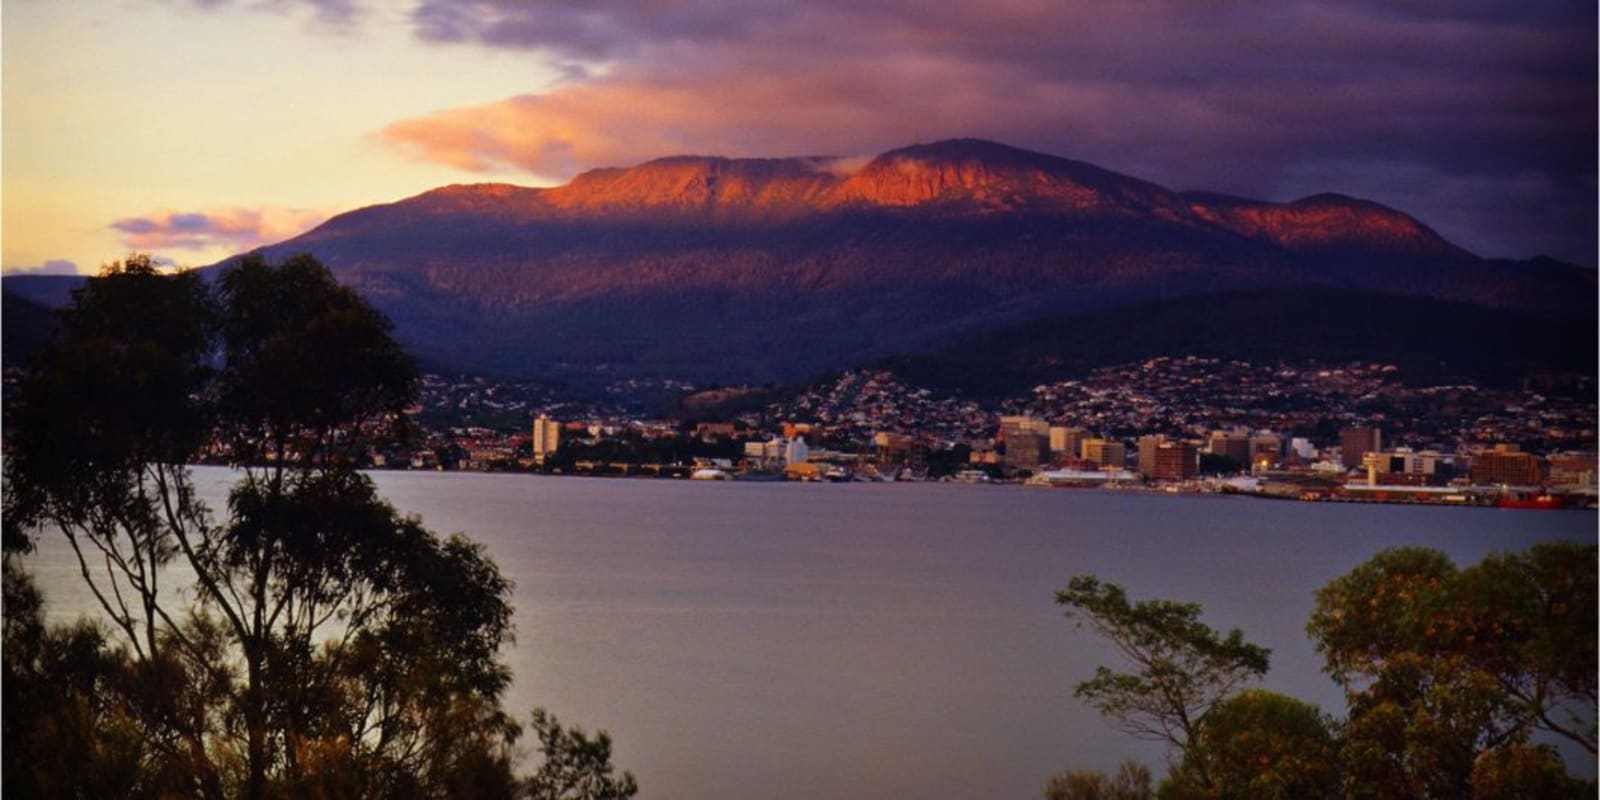 A view across the River Derwent looking at Hobart and Mount Wellington